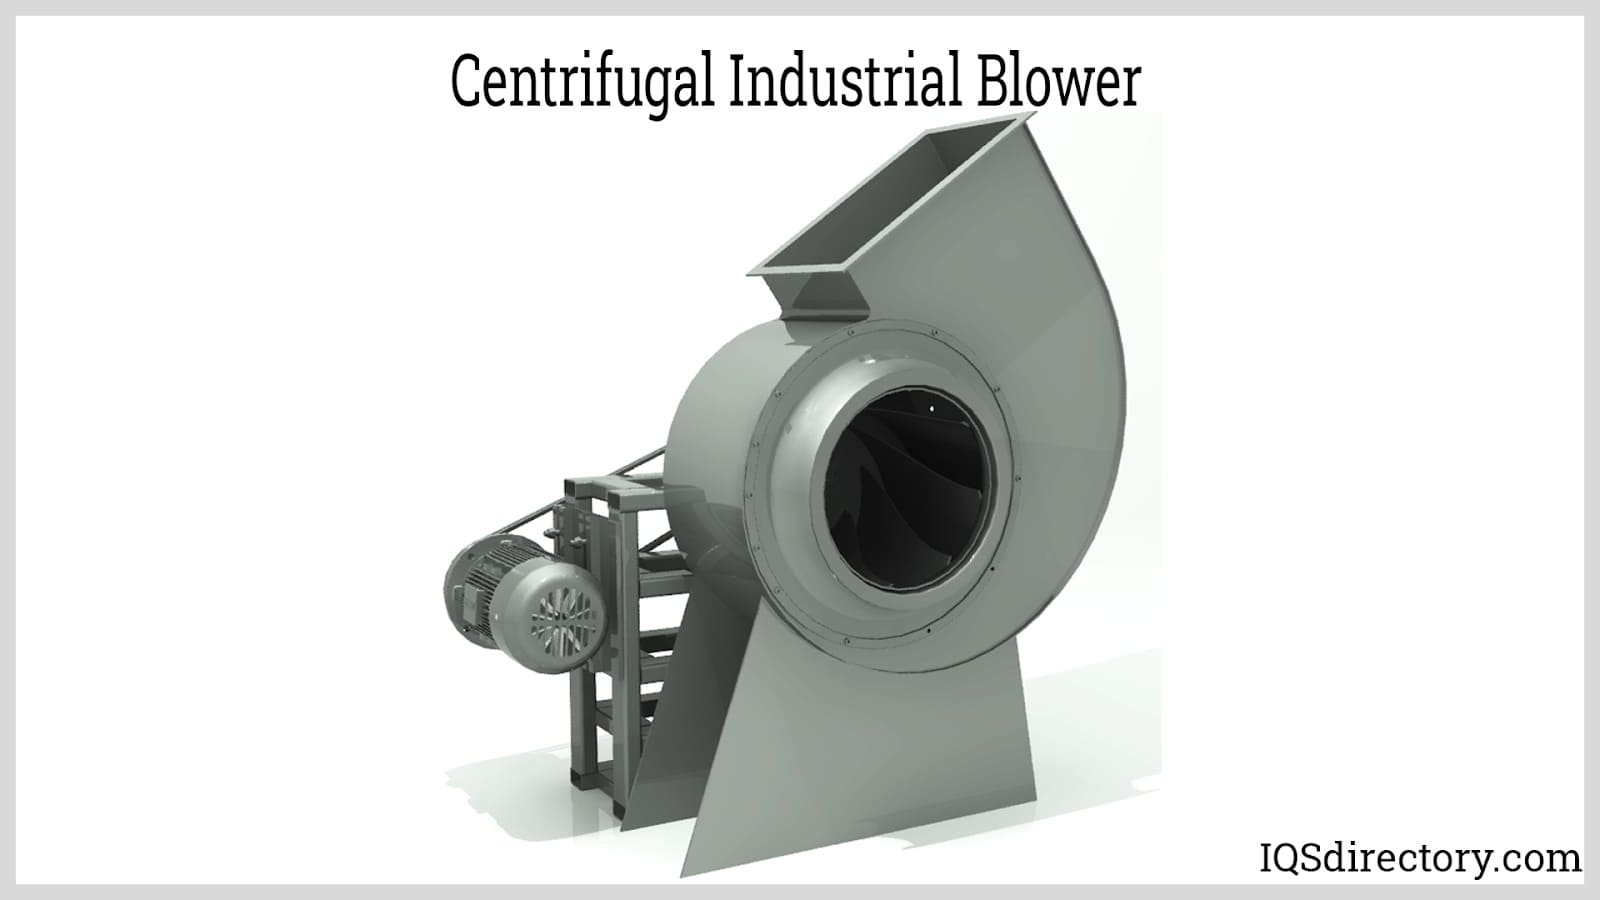 9. Importance of Blowers